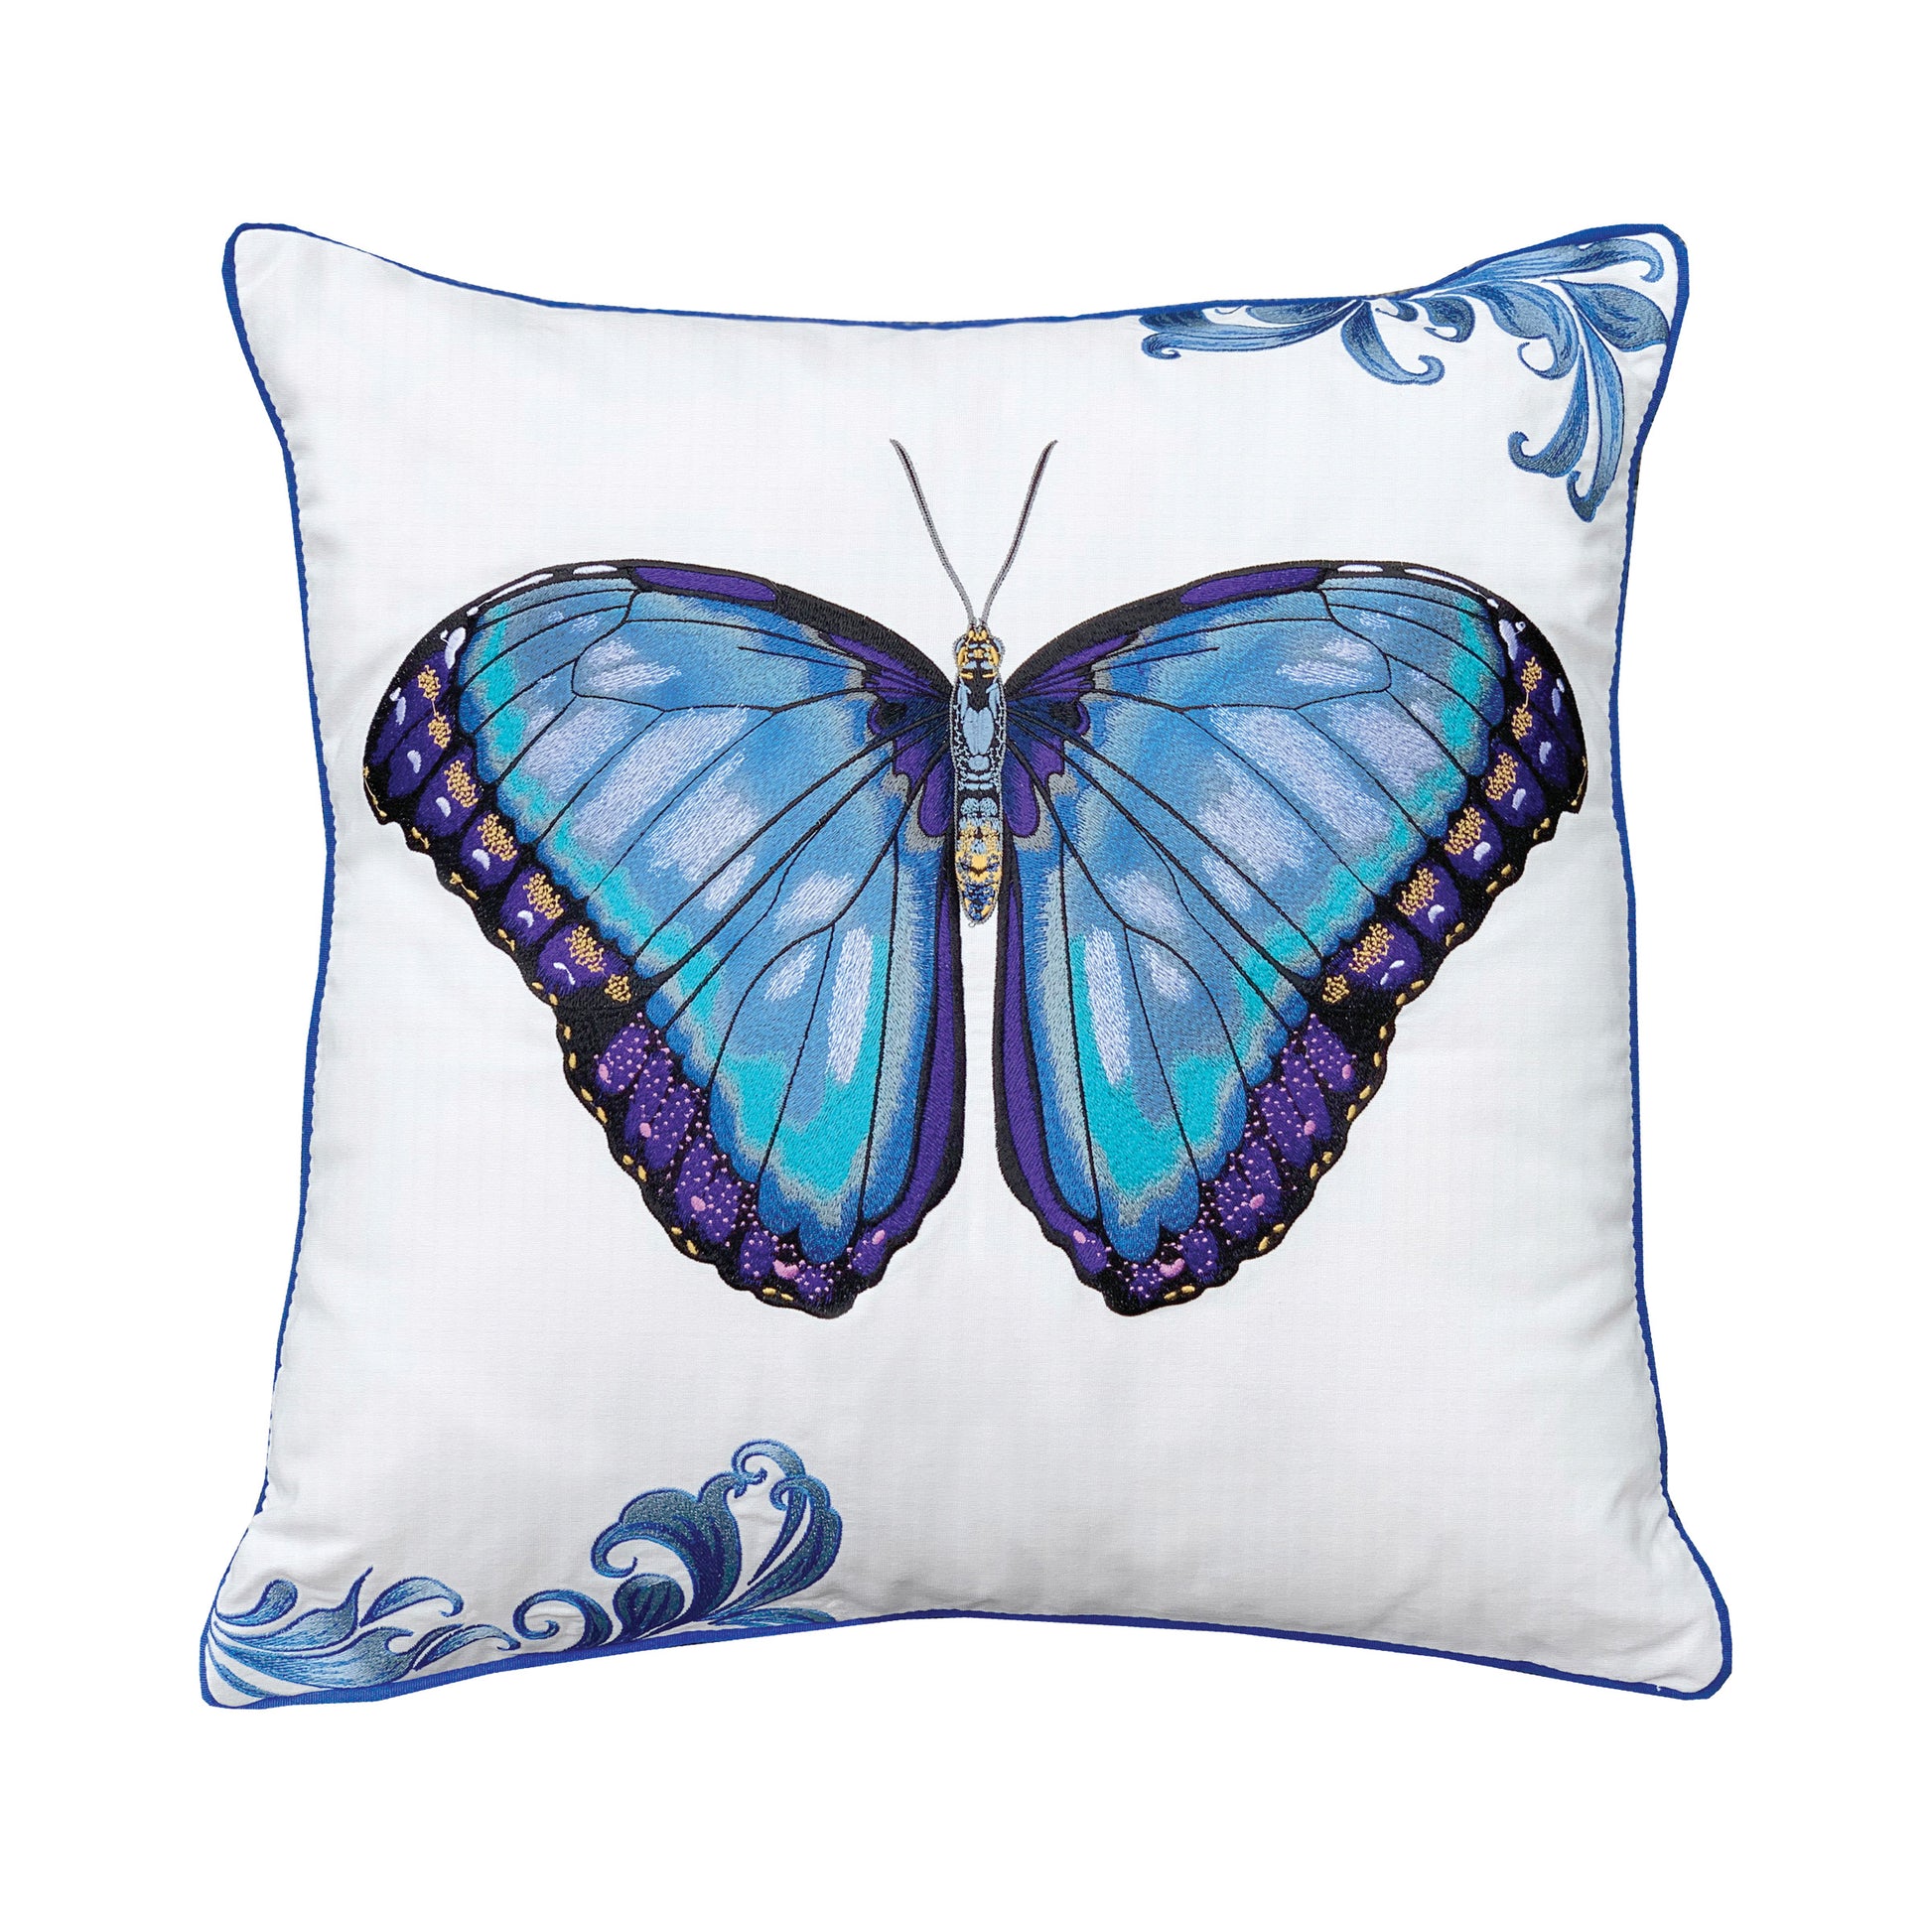 Large blue butterfly with purple, black, and gold accents embroidered on a white background. Blue scroll accents are located in the top right and bottom left corners.